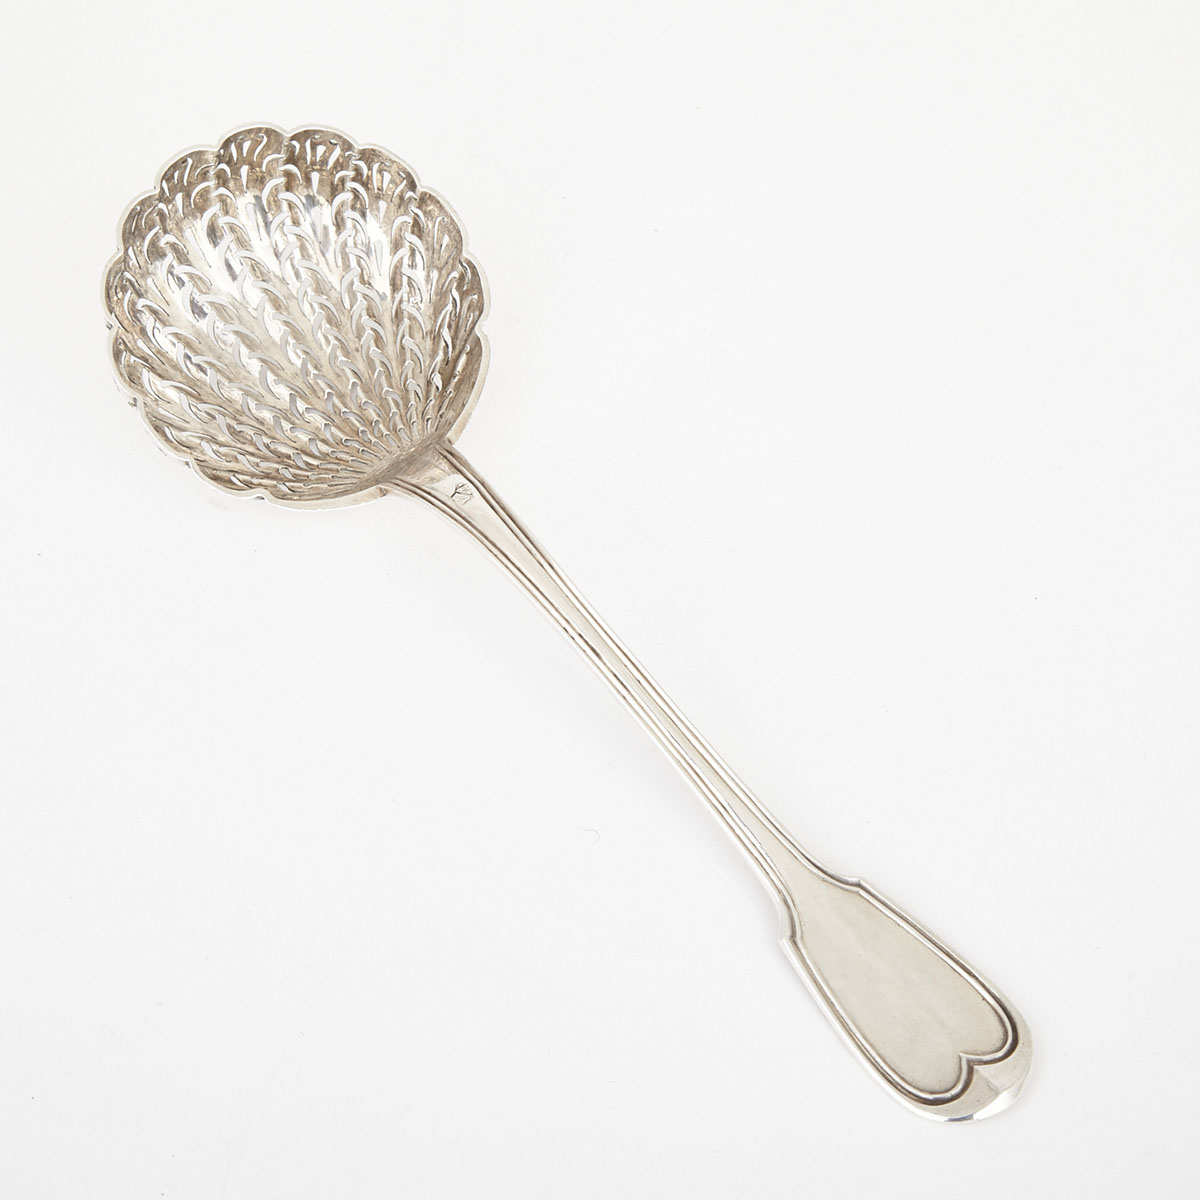 French Silver Fiddle and Thread Pattern Sugar Sifting Spoon, Paris, 1819-38